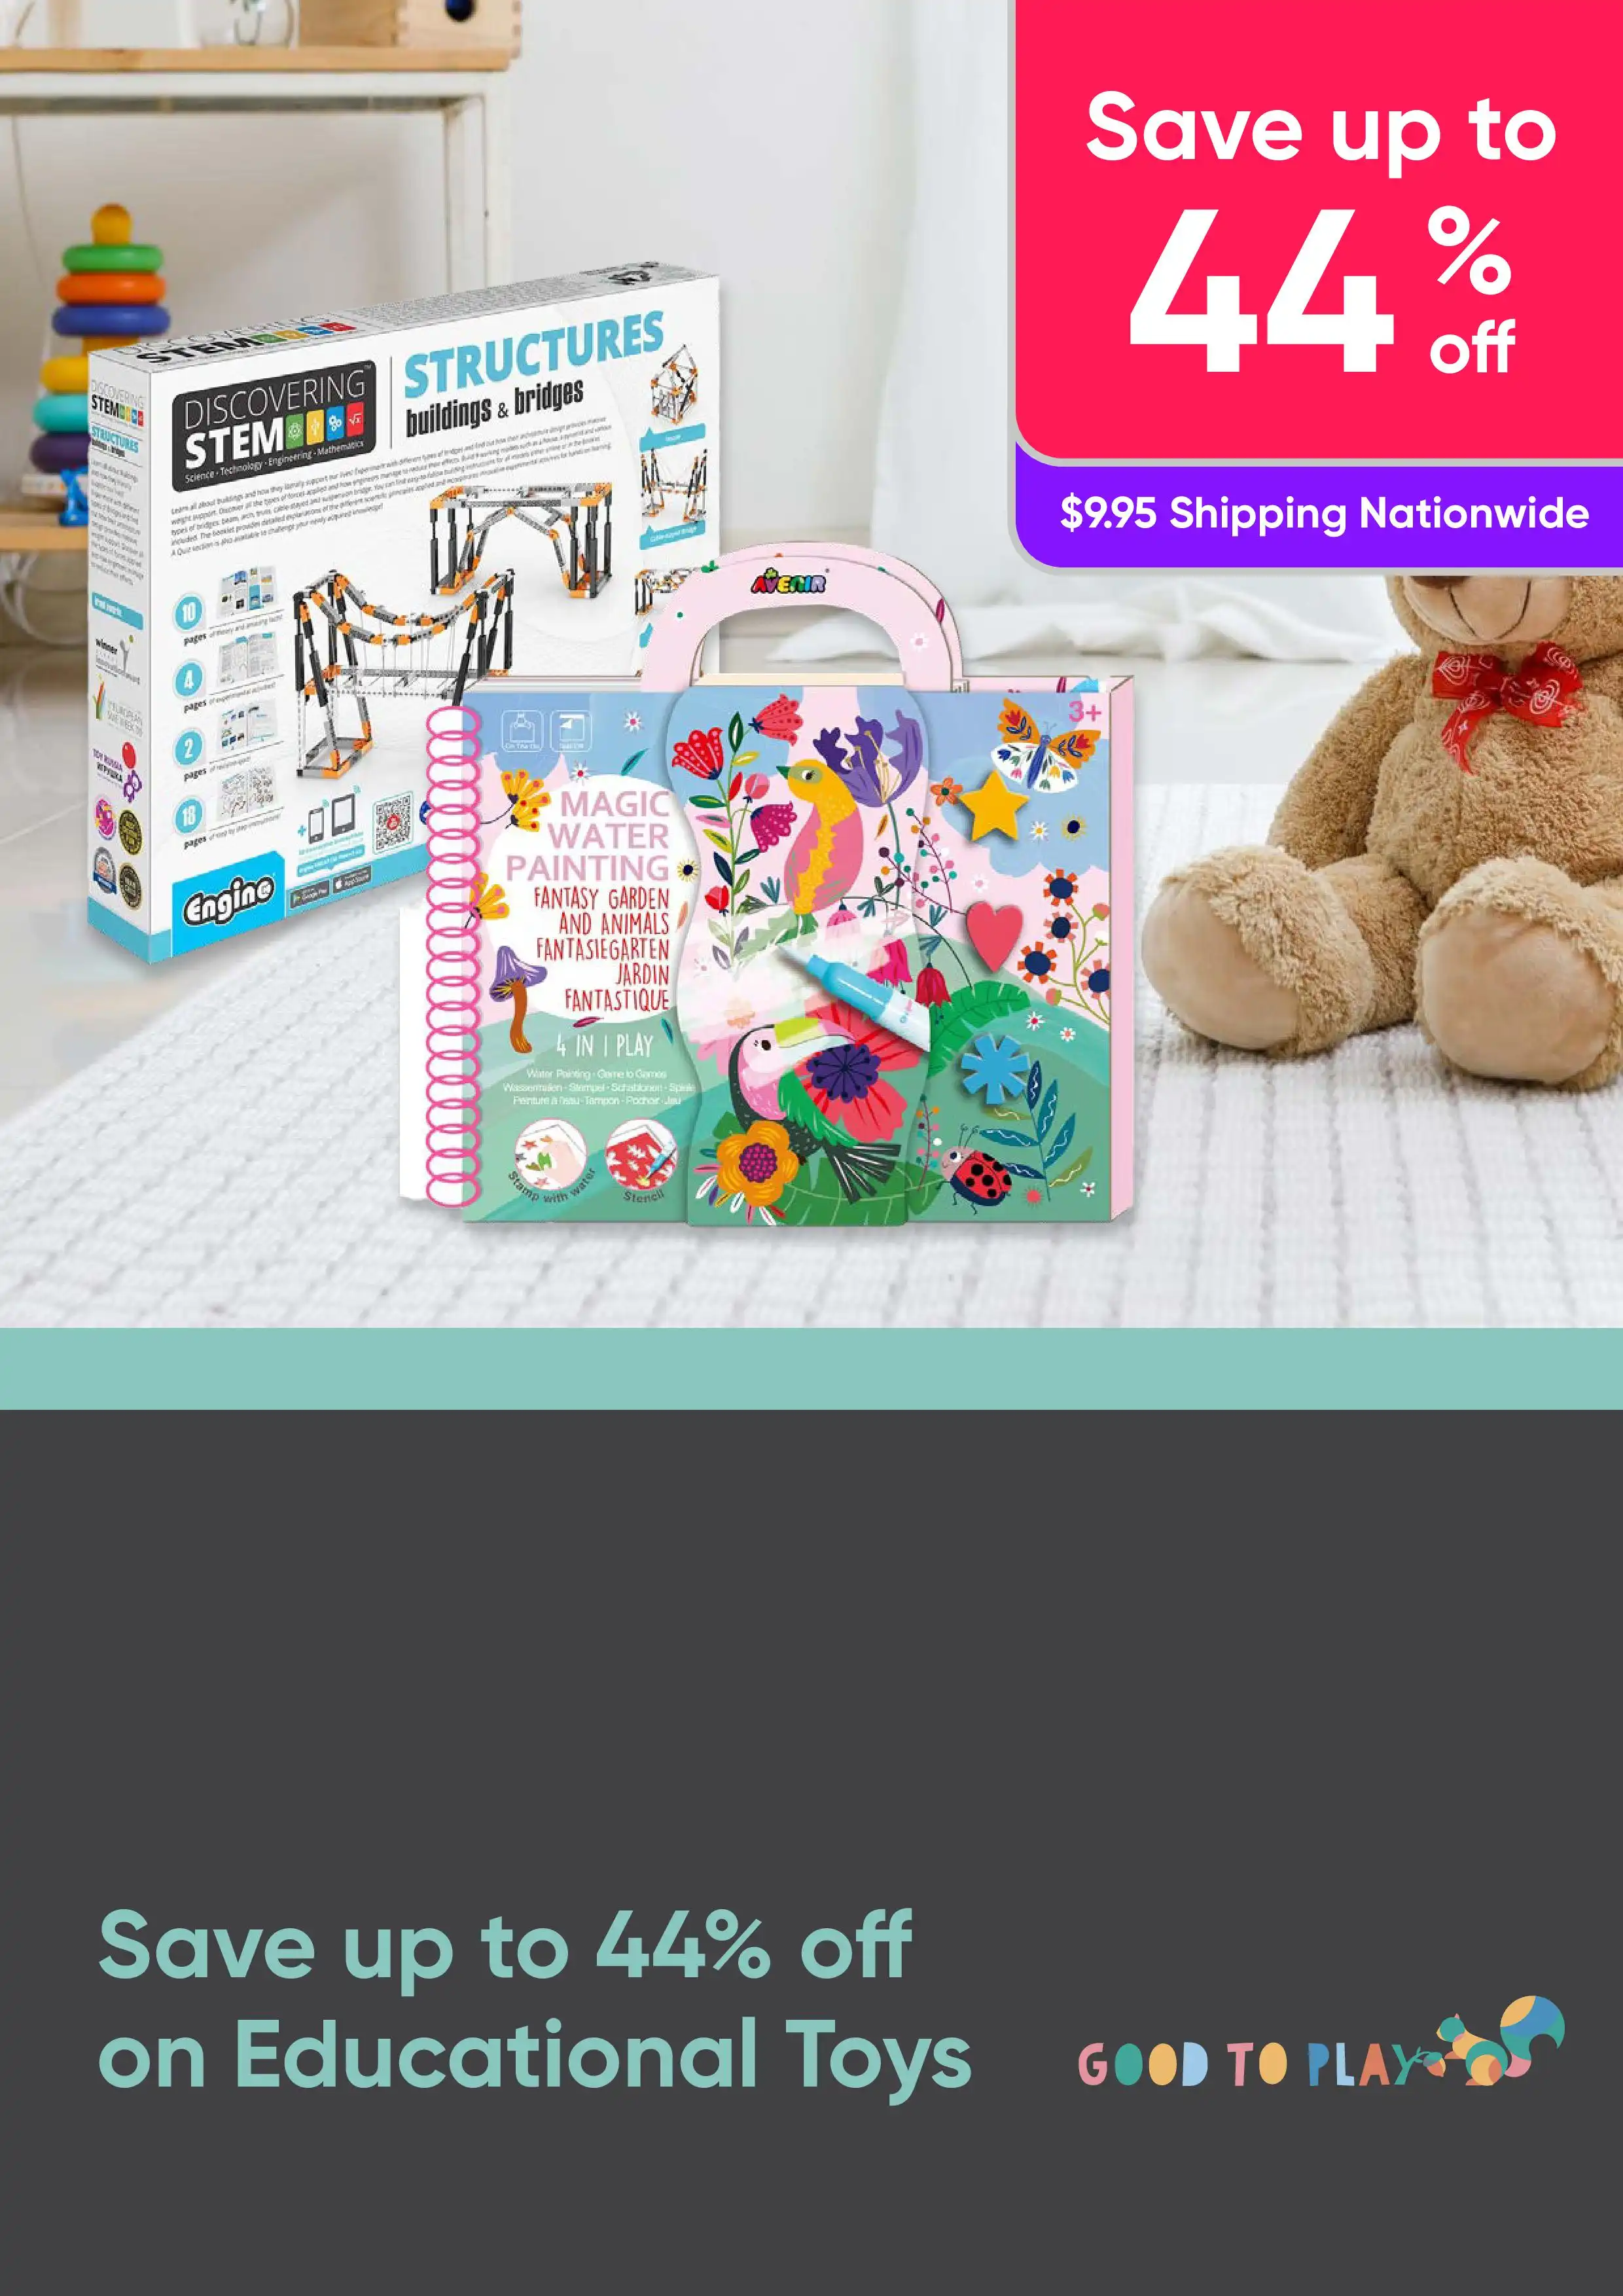 Save up to 44% on Educational Toys